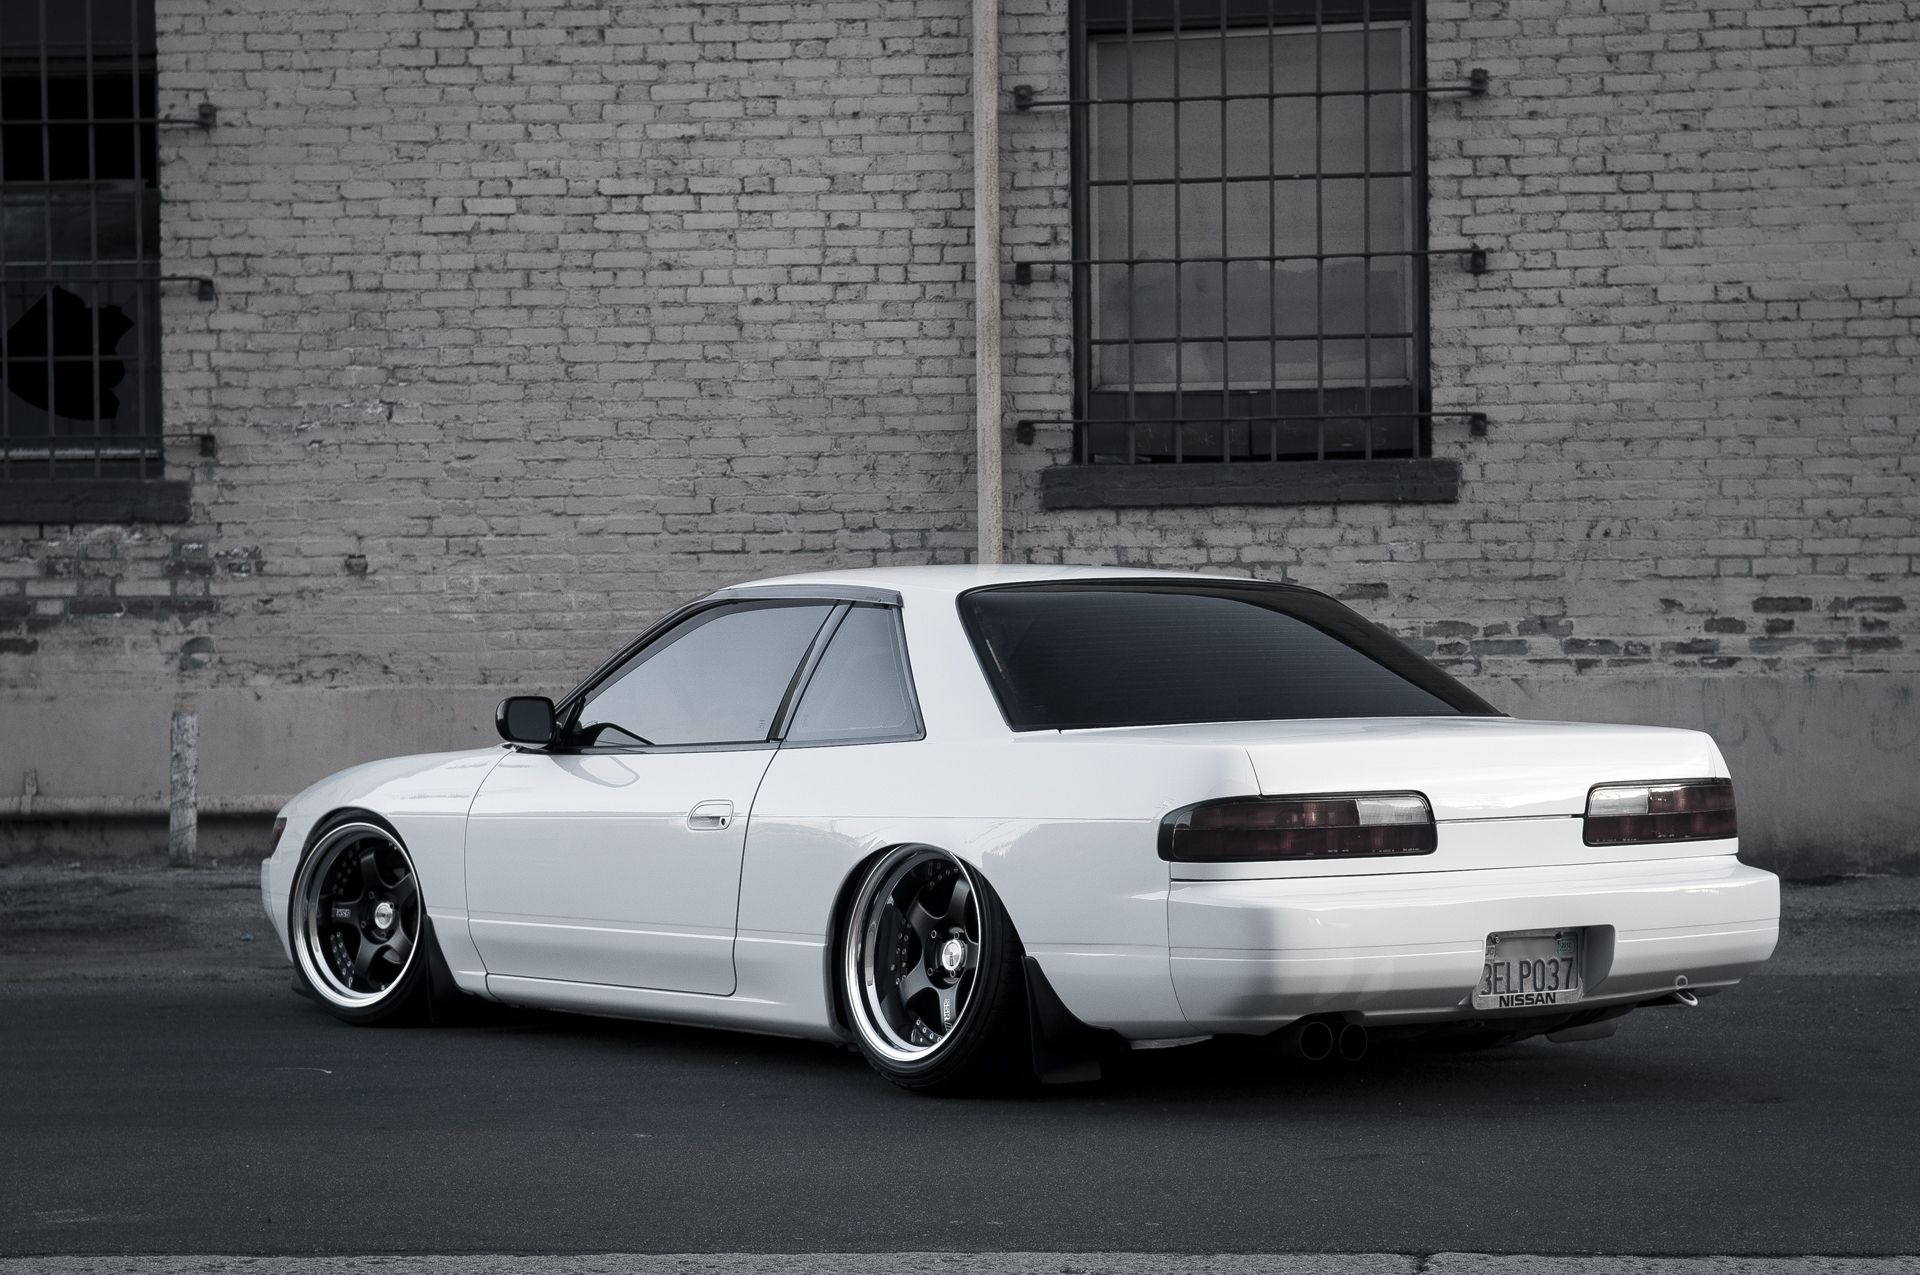 Cars Tuning White Cars Nissan Silvia S15 Wallpaper Silvia S13 Stanced